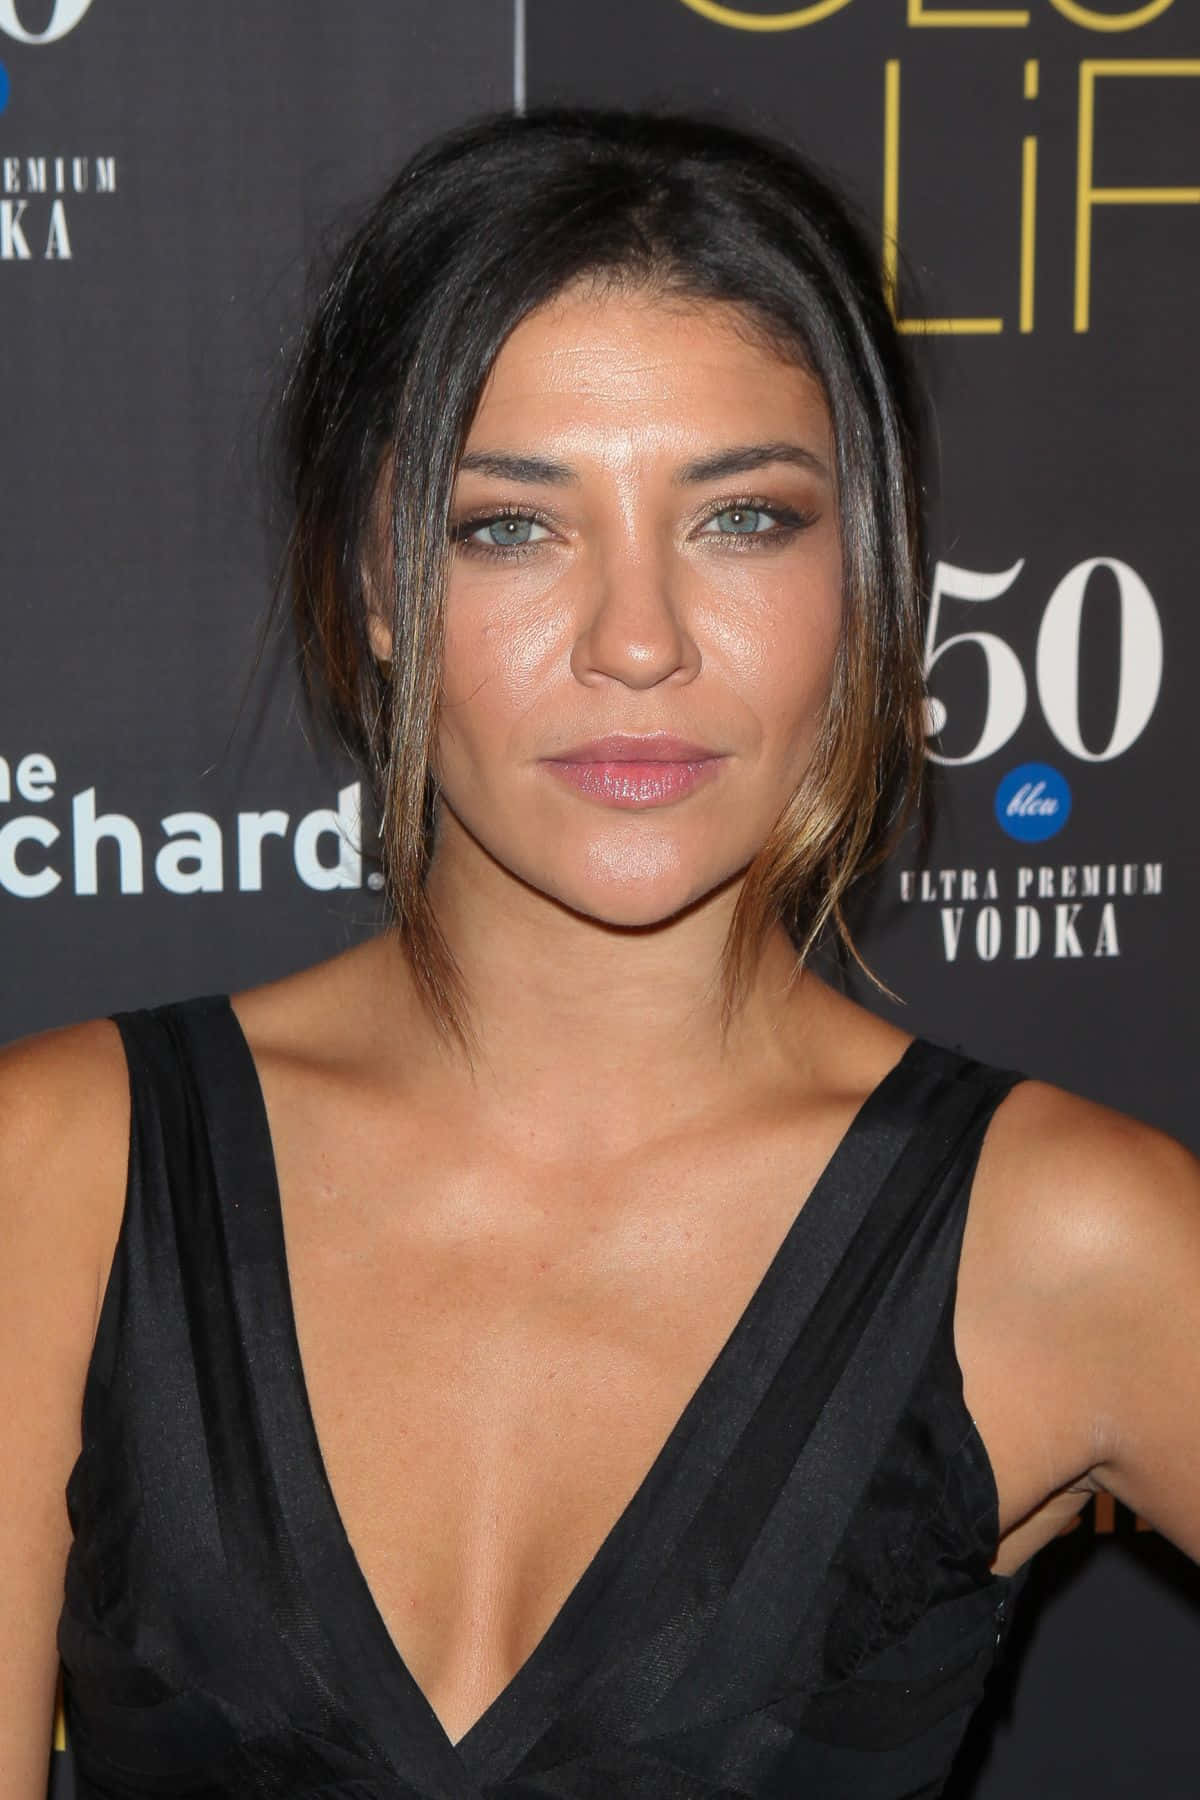 Jessica Szohr Posing Gracefully In A Black Outfit